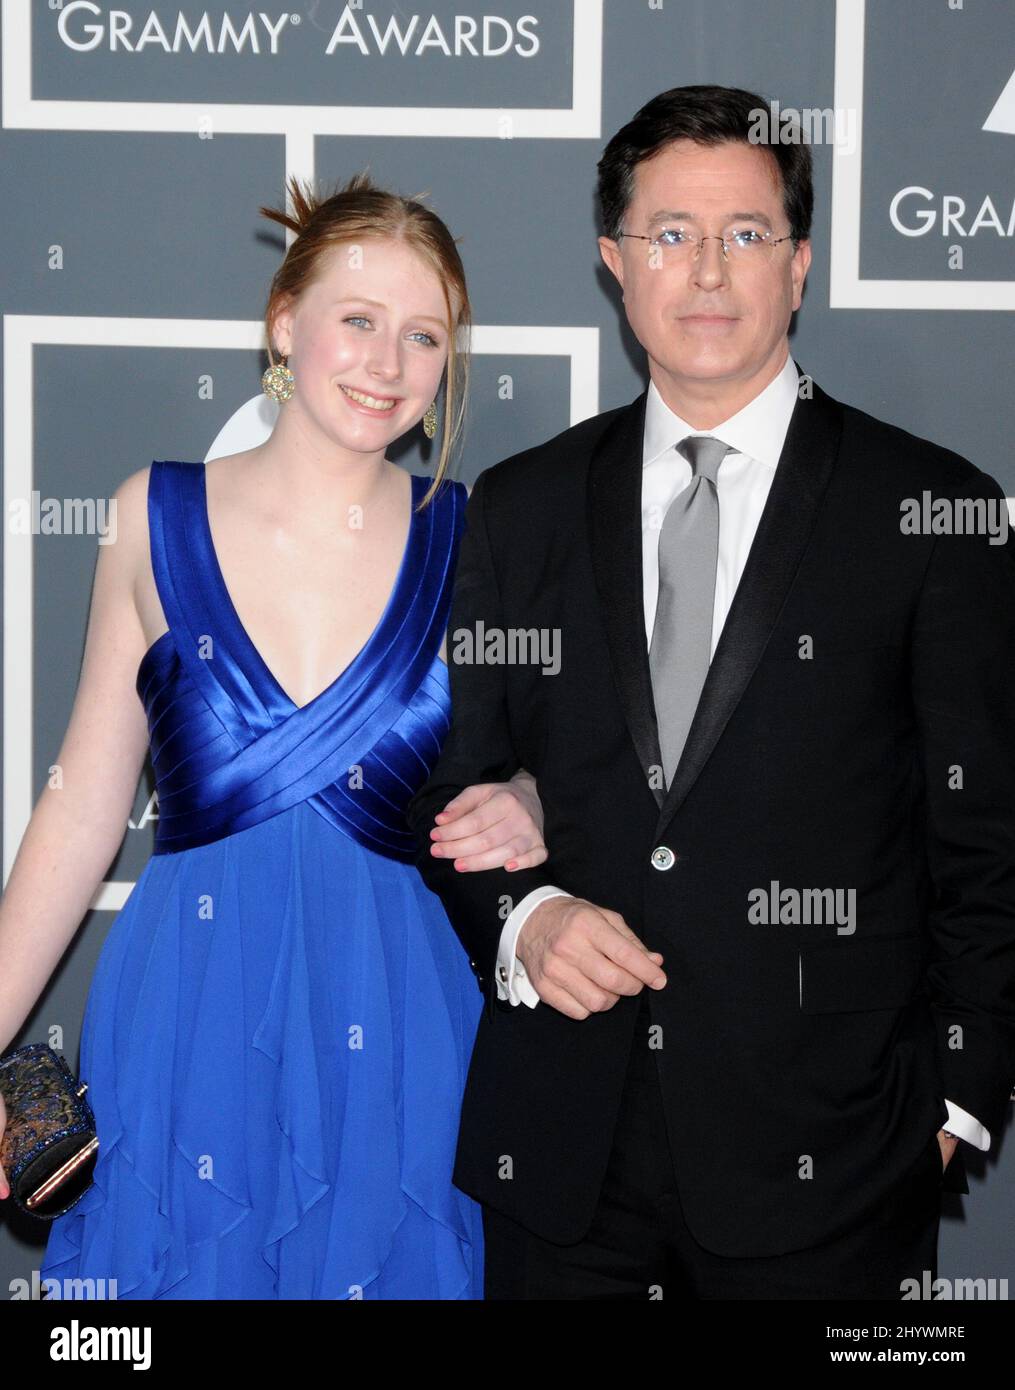 Stephen Colbert arrives at the 52nd Annual Grammy Awards held at the Staple Center in Los Angeles, California. Stock Photo